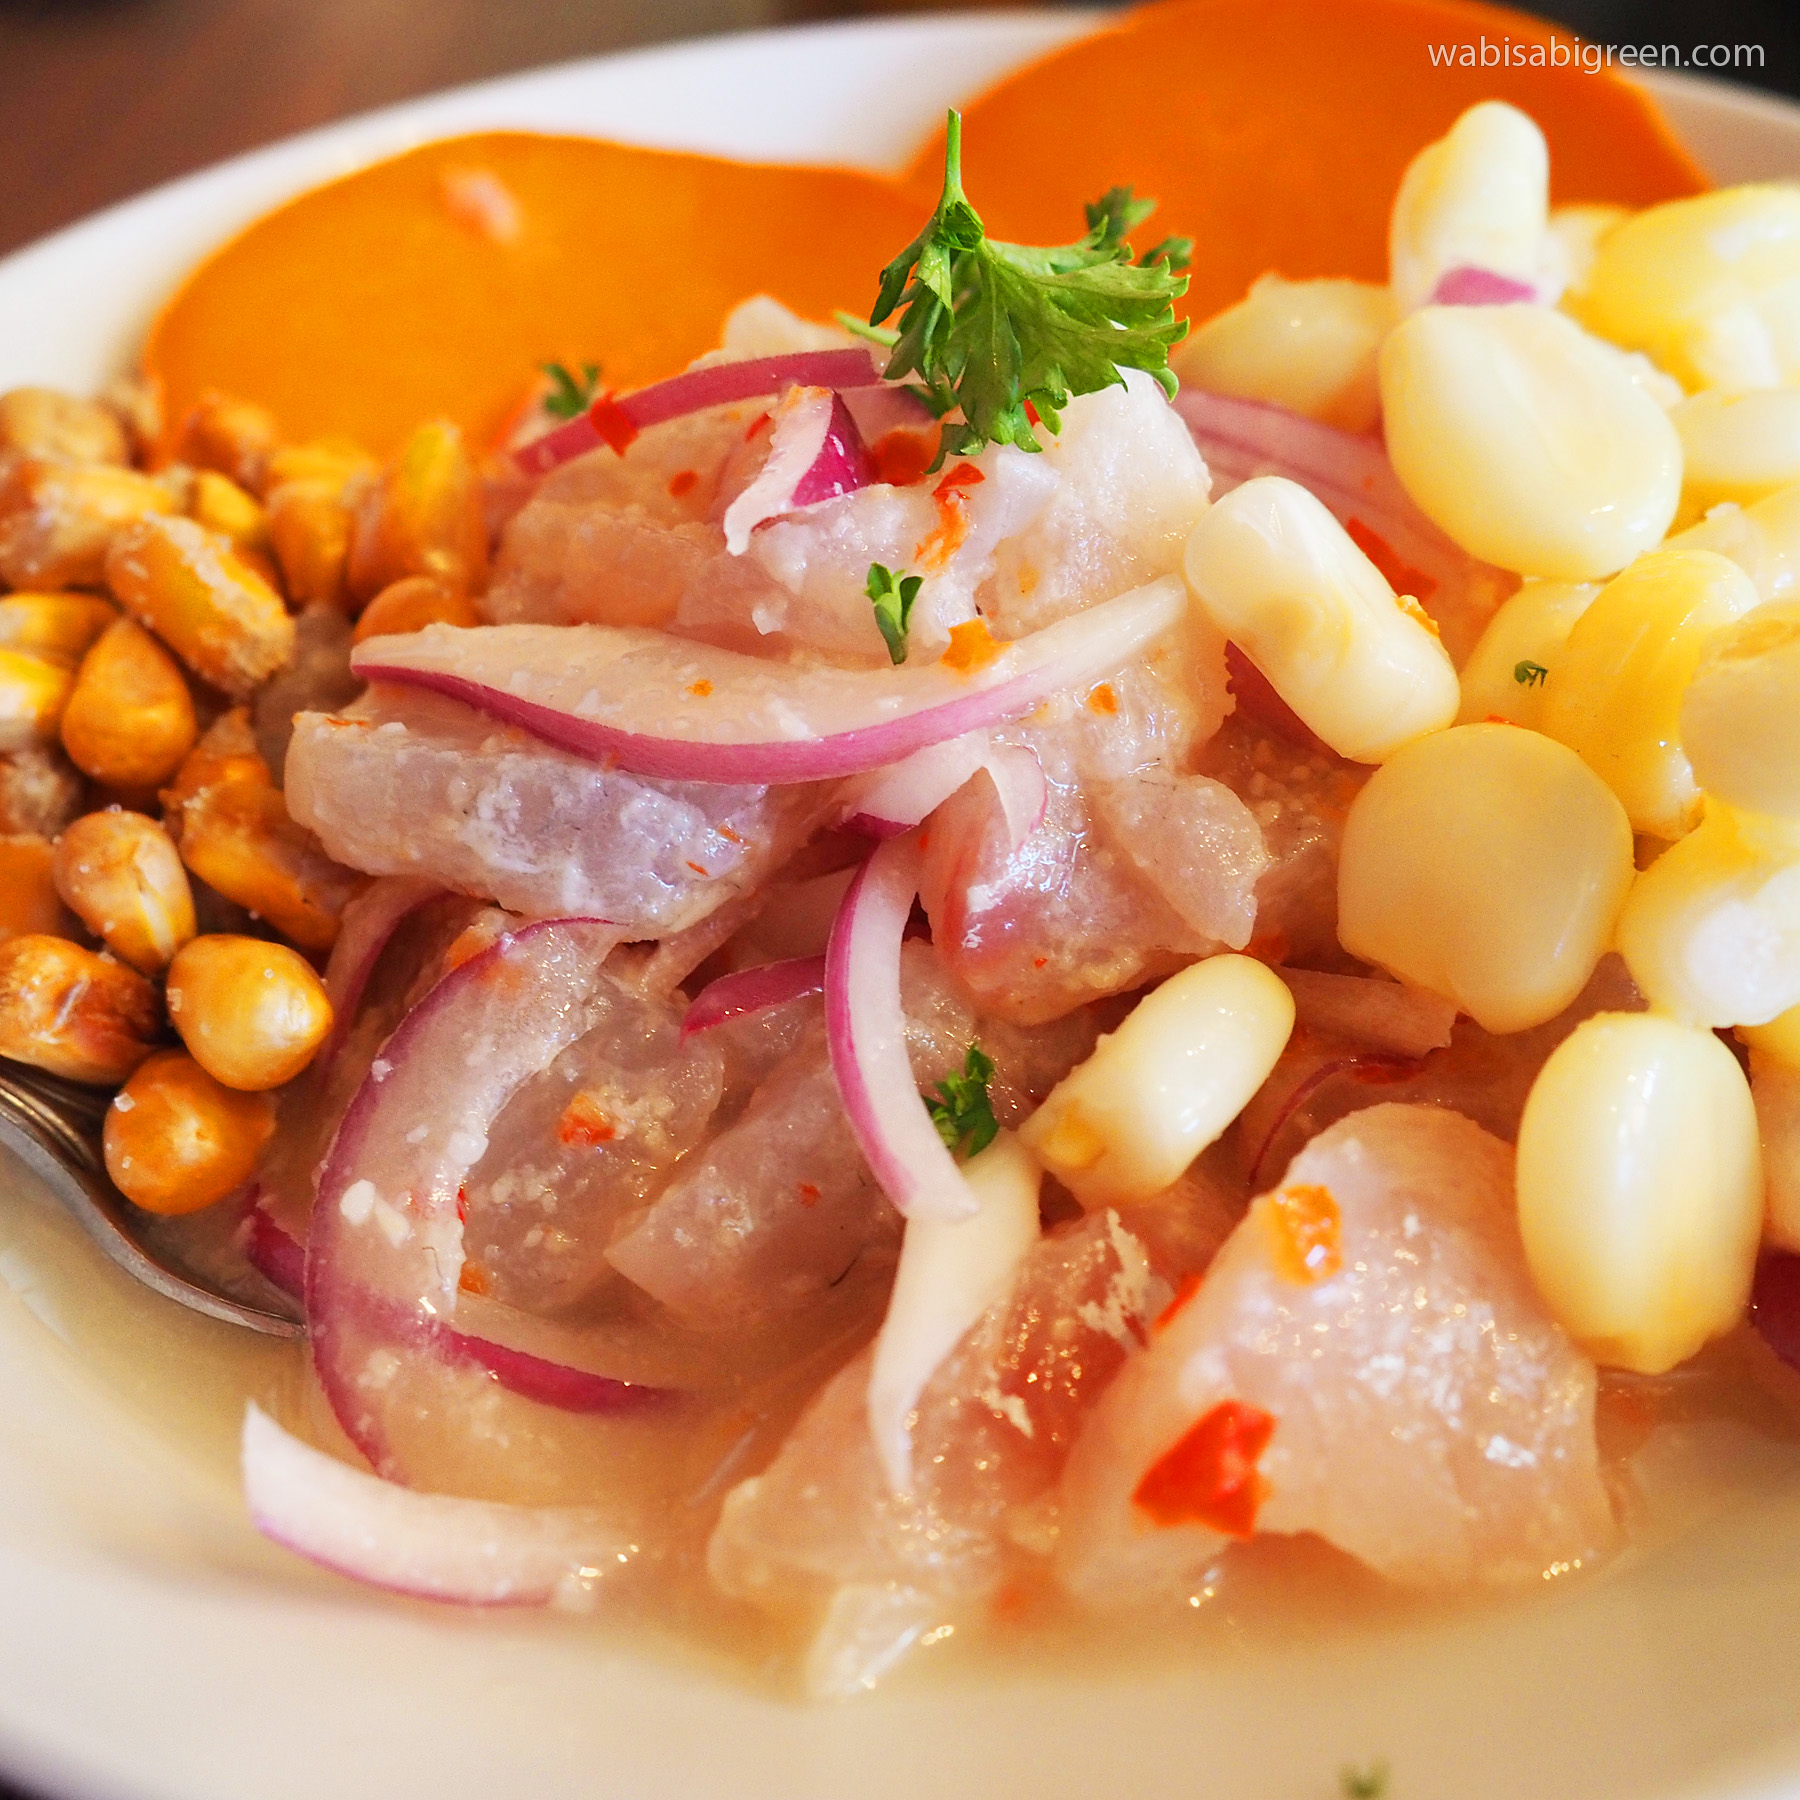 Panca Peruvian Cuisine and Rotisserie Ceviche - Not to miss Oceanside Eateries